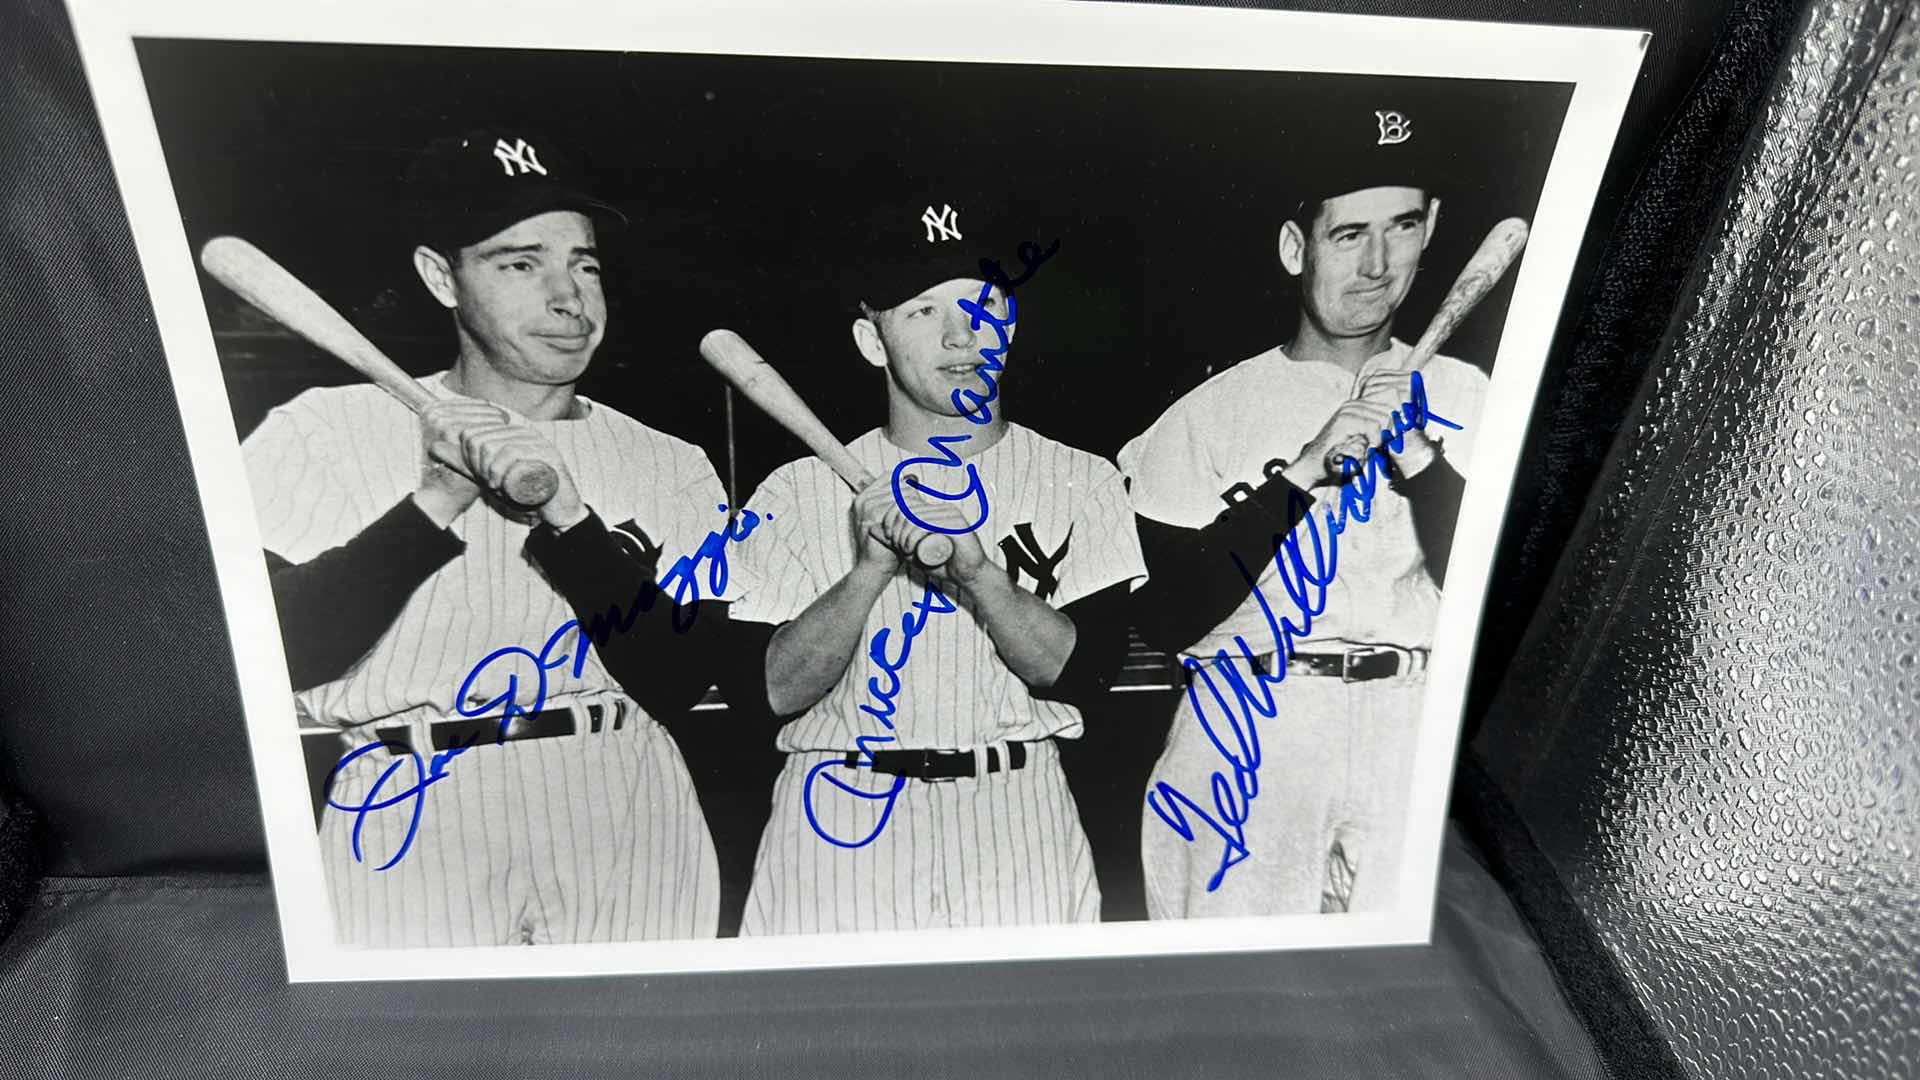 Photo 2 of RARE MICKEY MANTLE, TED WILLIAMS, & JOE DIMAGGIO 8”X10” AUTOGRAPHED PHOTO AUTHENTICITY VERIFIED BY SELLER